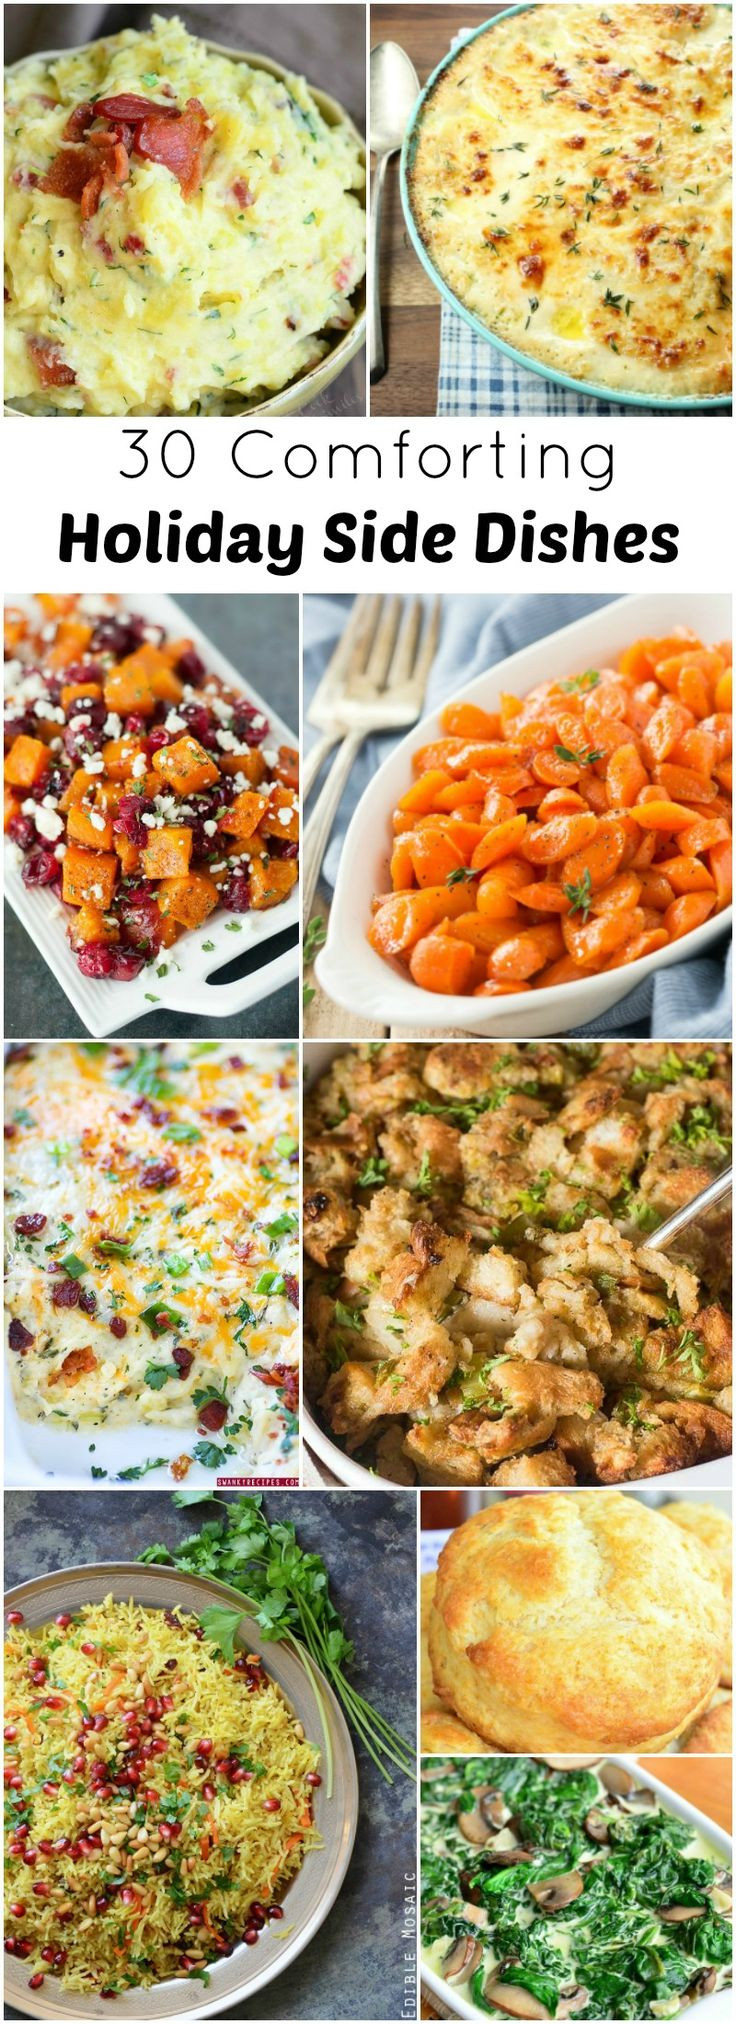 Christmas Dinner Sides
 17 Best ideas about Holiday Side Dishes on Pinterest